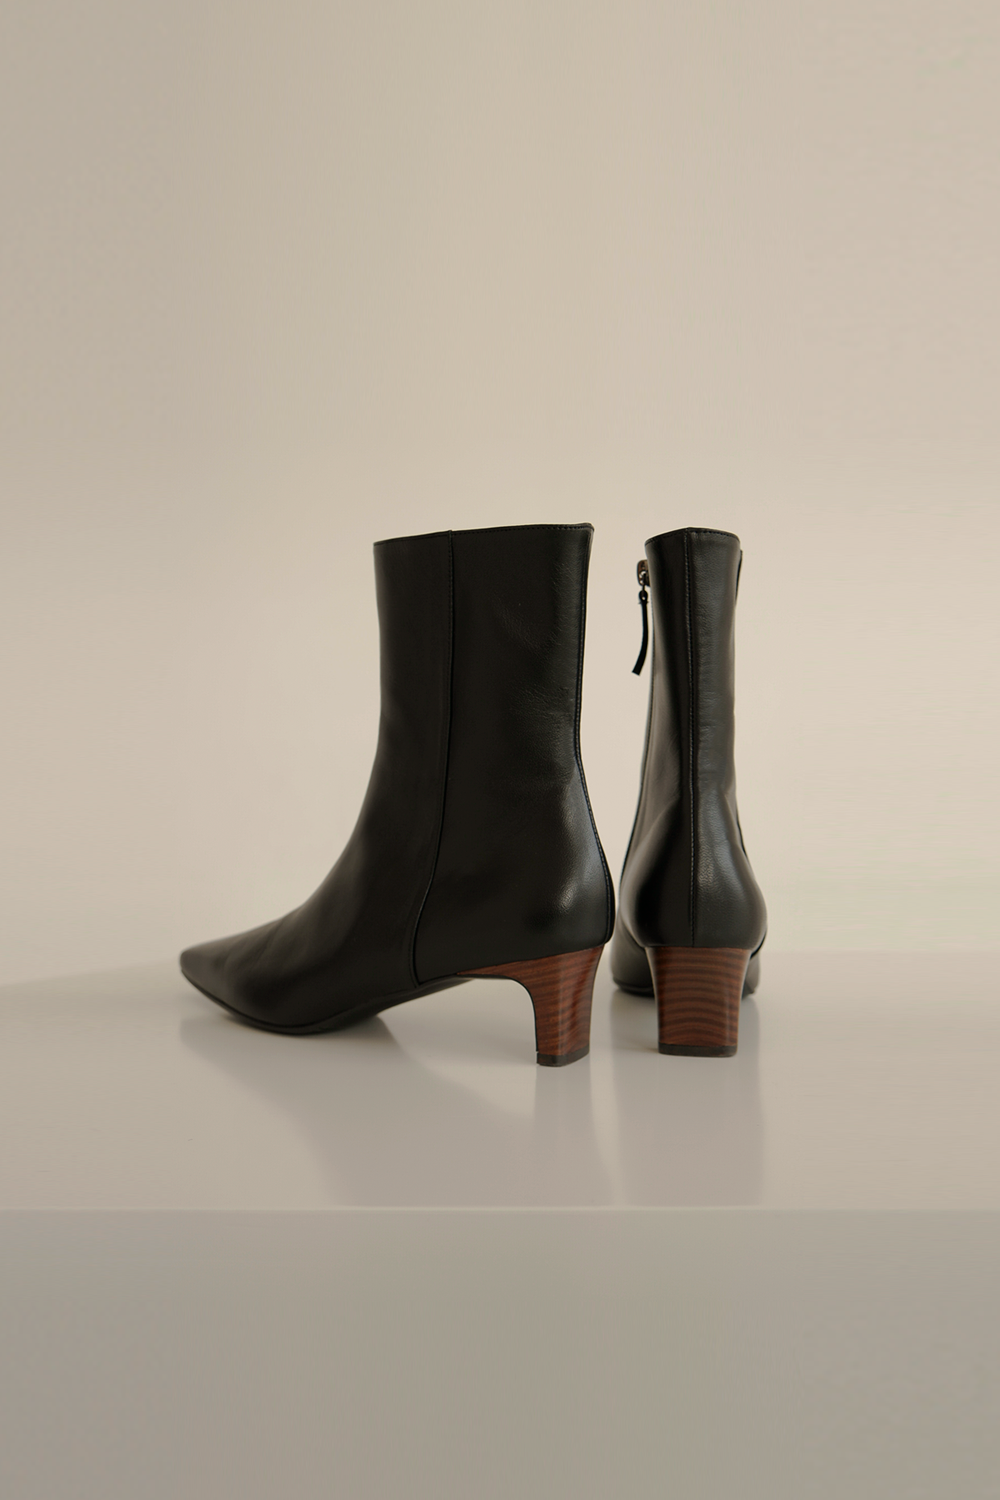 ANTHÈSE delicate ankle boots, black